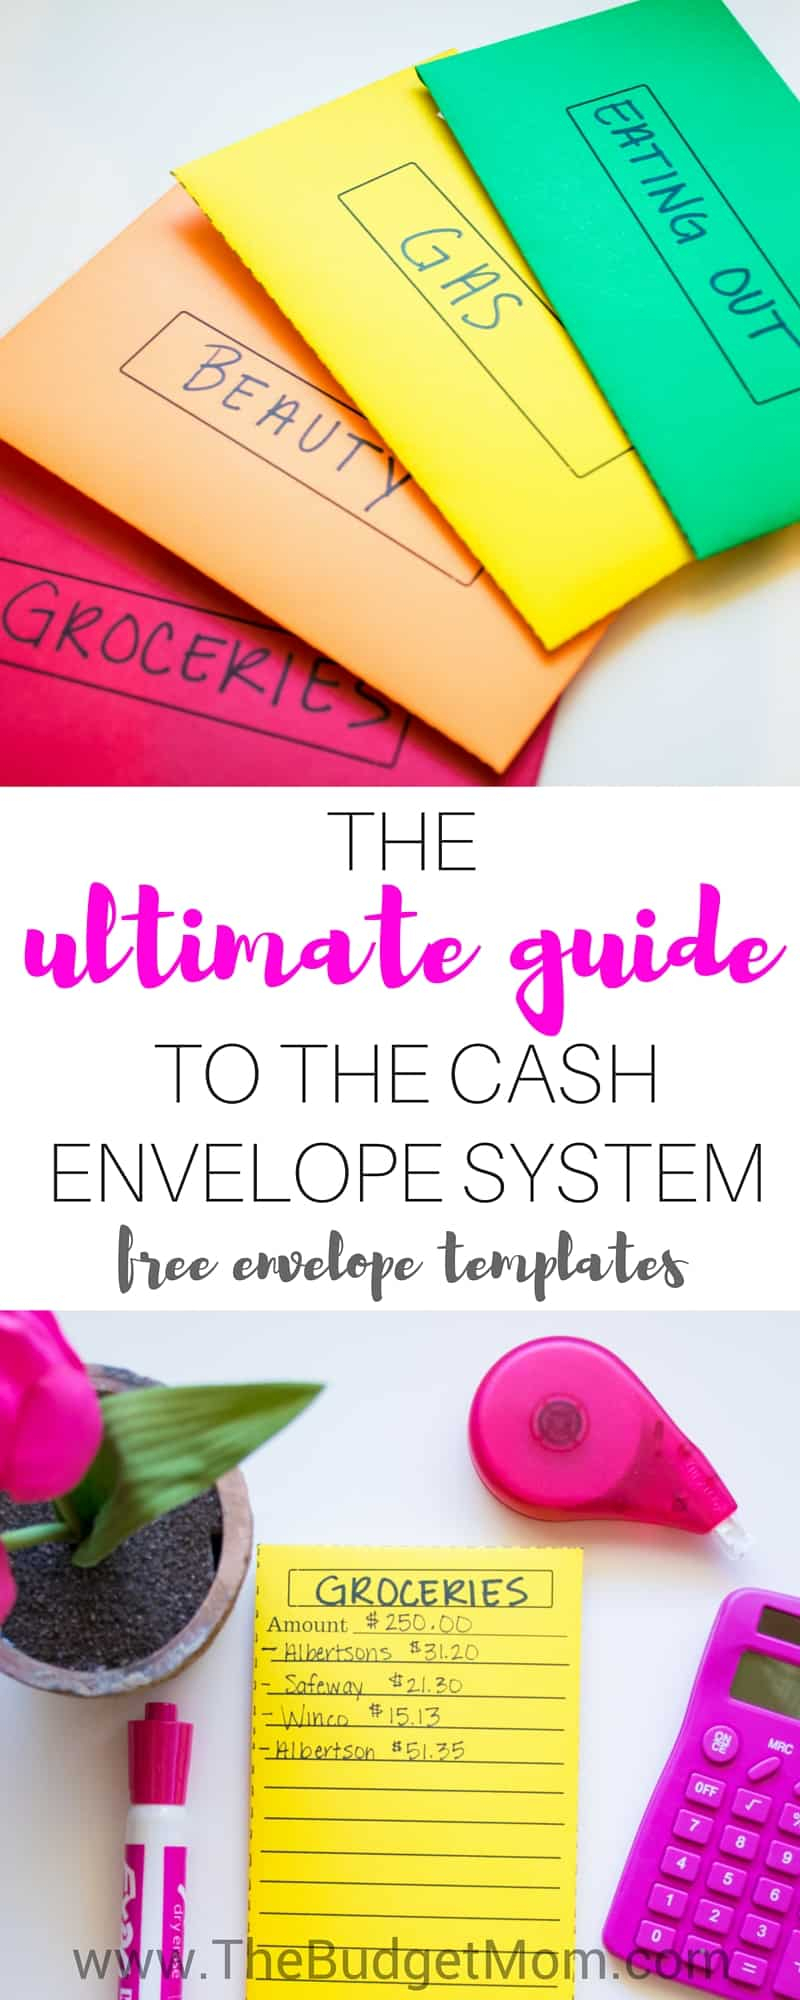 The Ultimate Guide To The Cash Envelope System  The Budget Mom